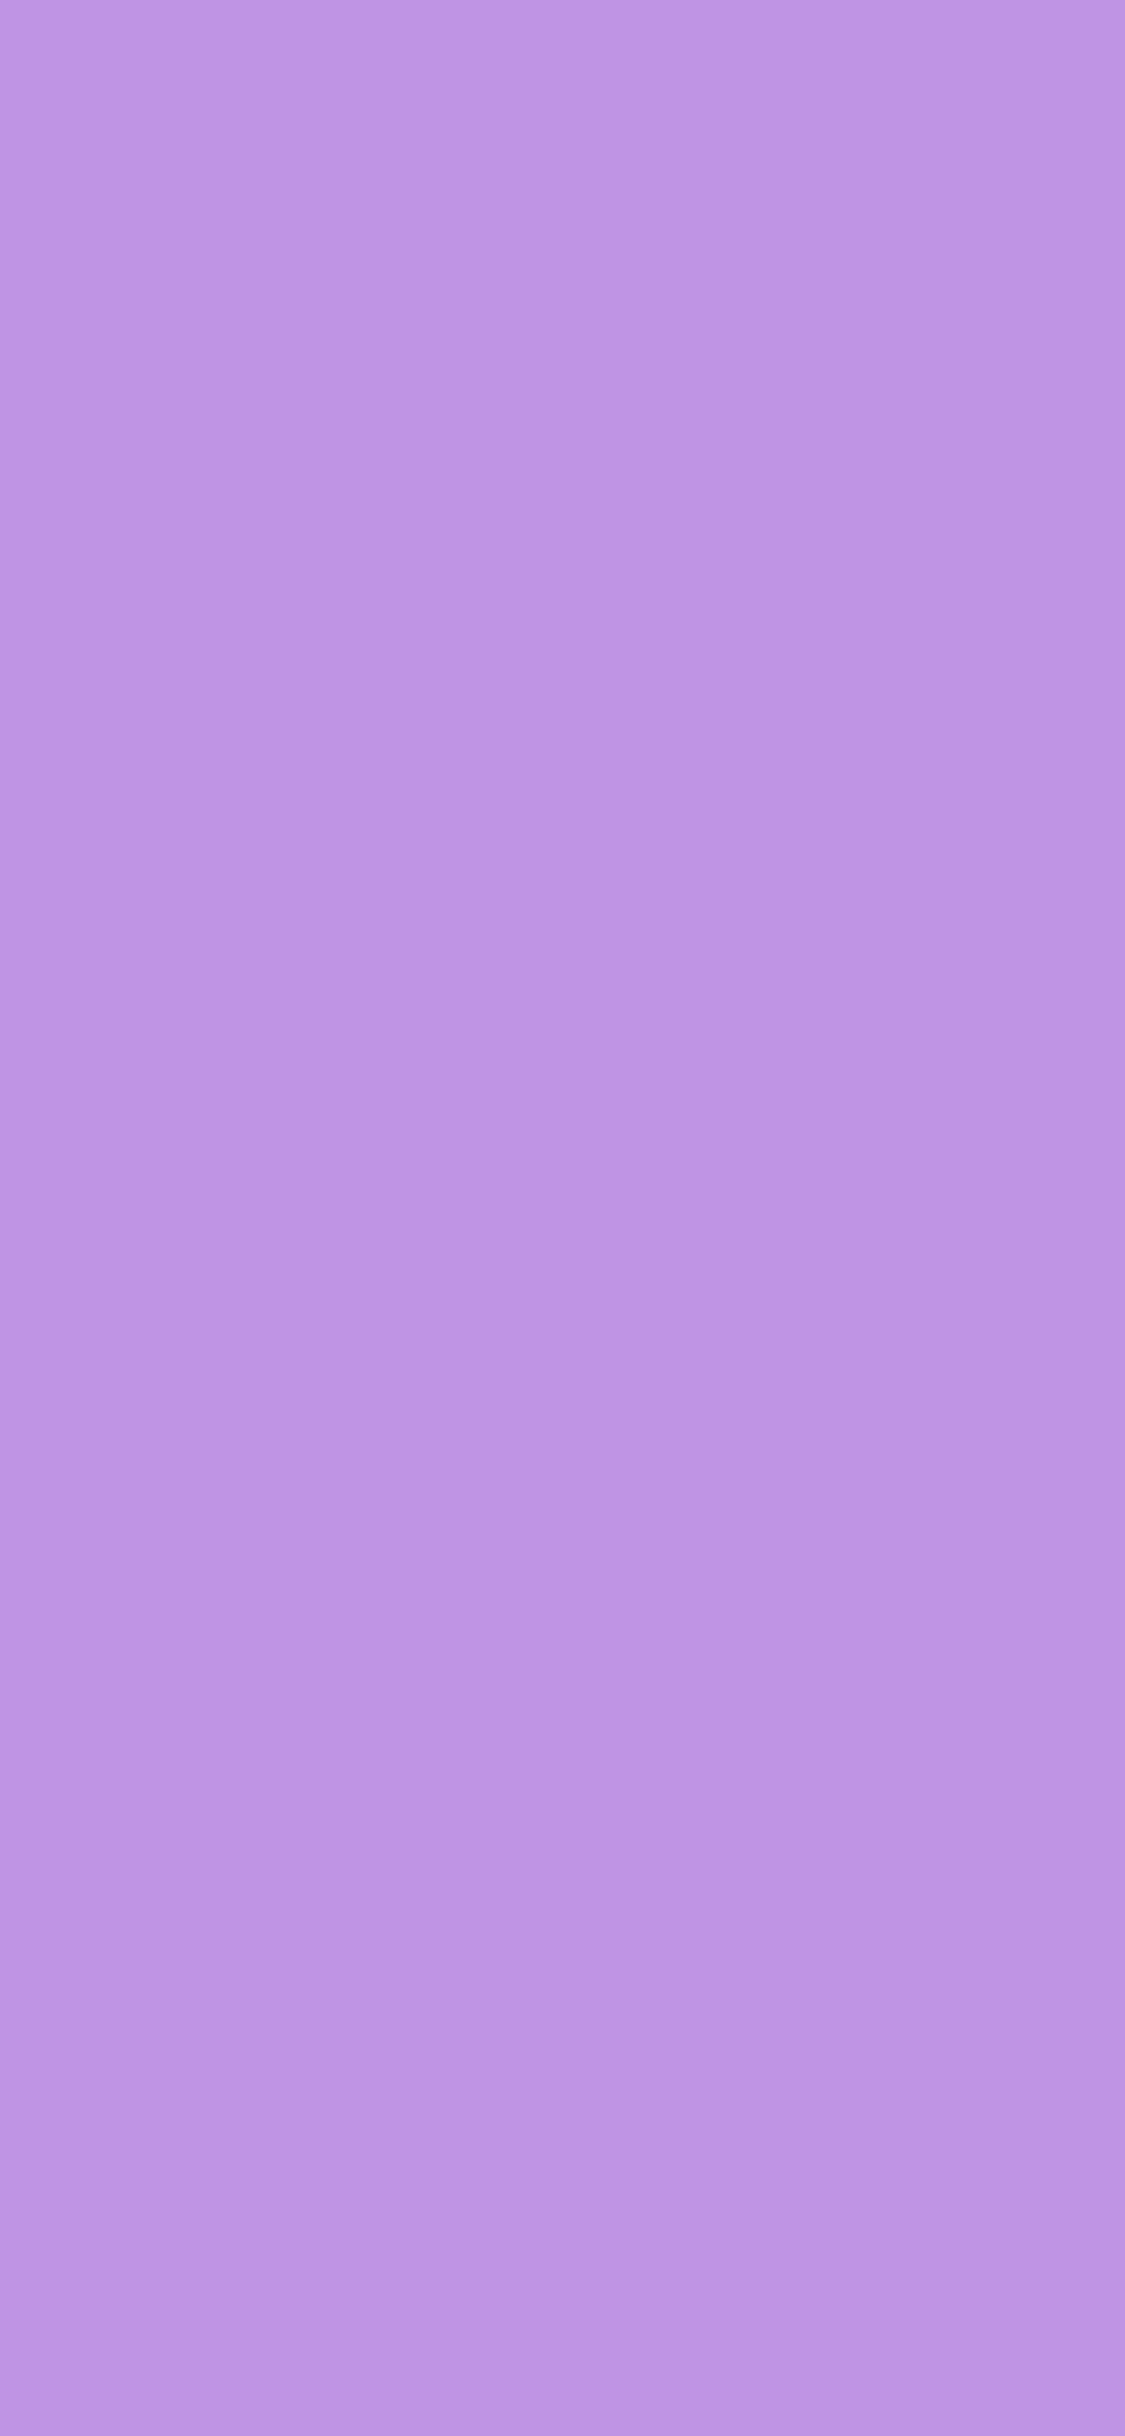 1125x2436 Bright Lavender Solid Color Background